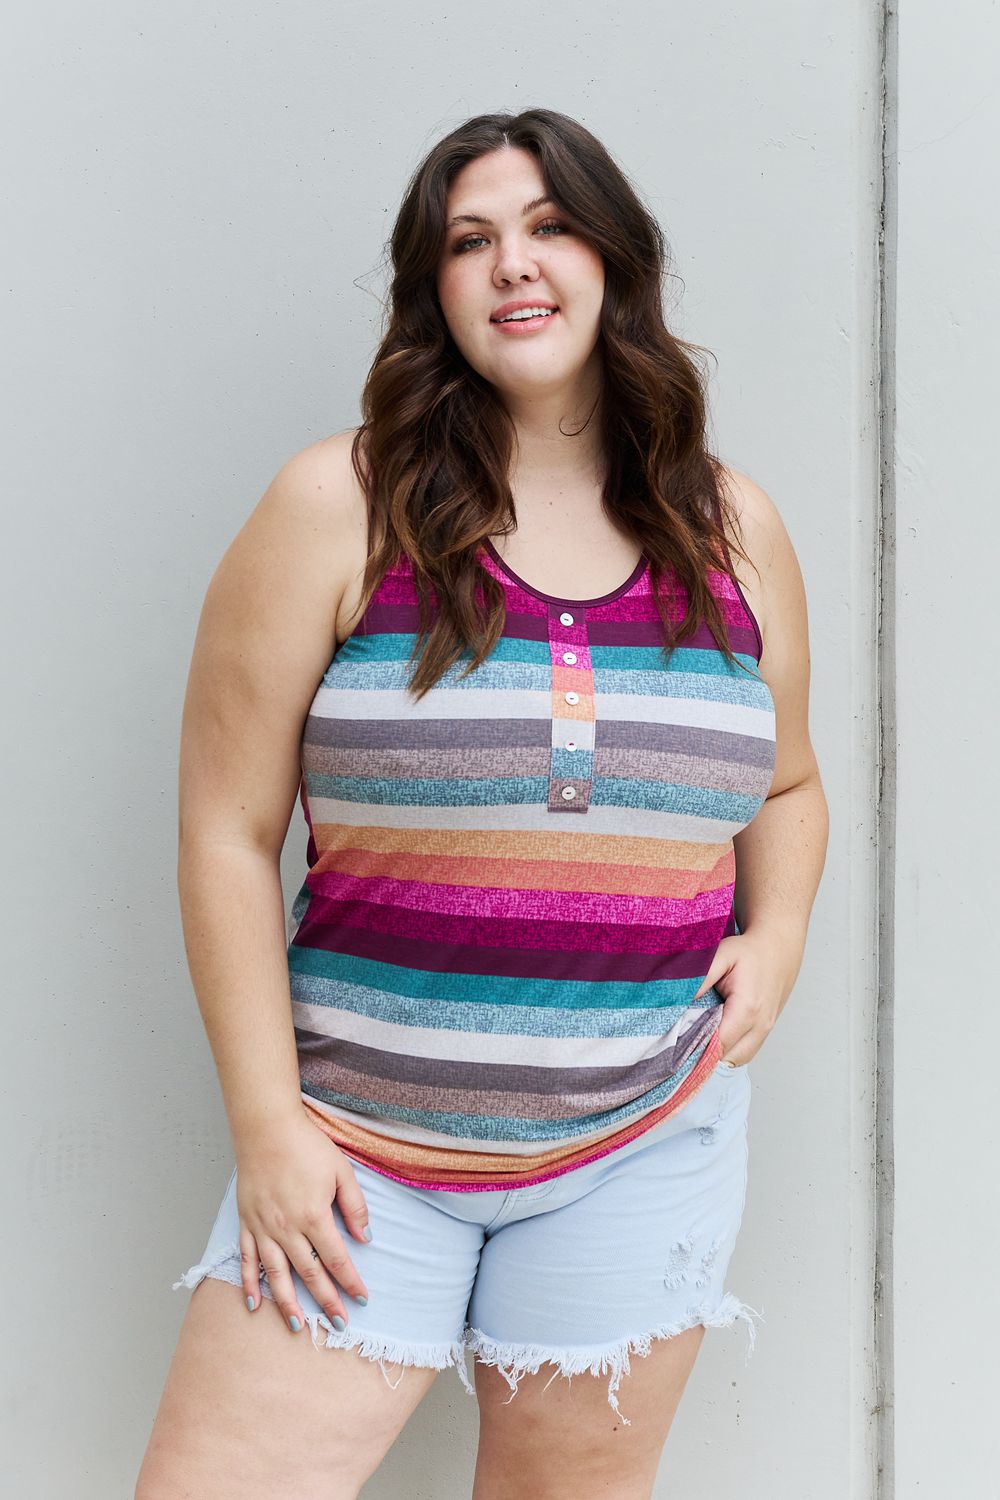 Heimish Love Me For Me Full Size Multicolored Striped Top